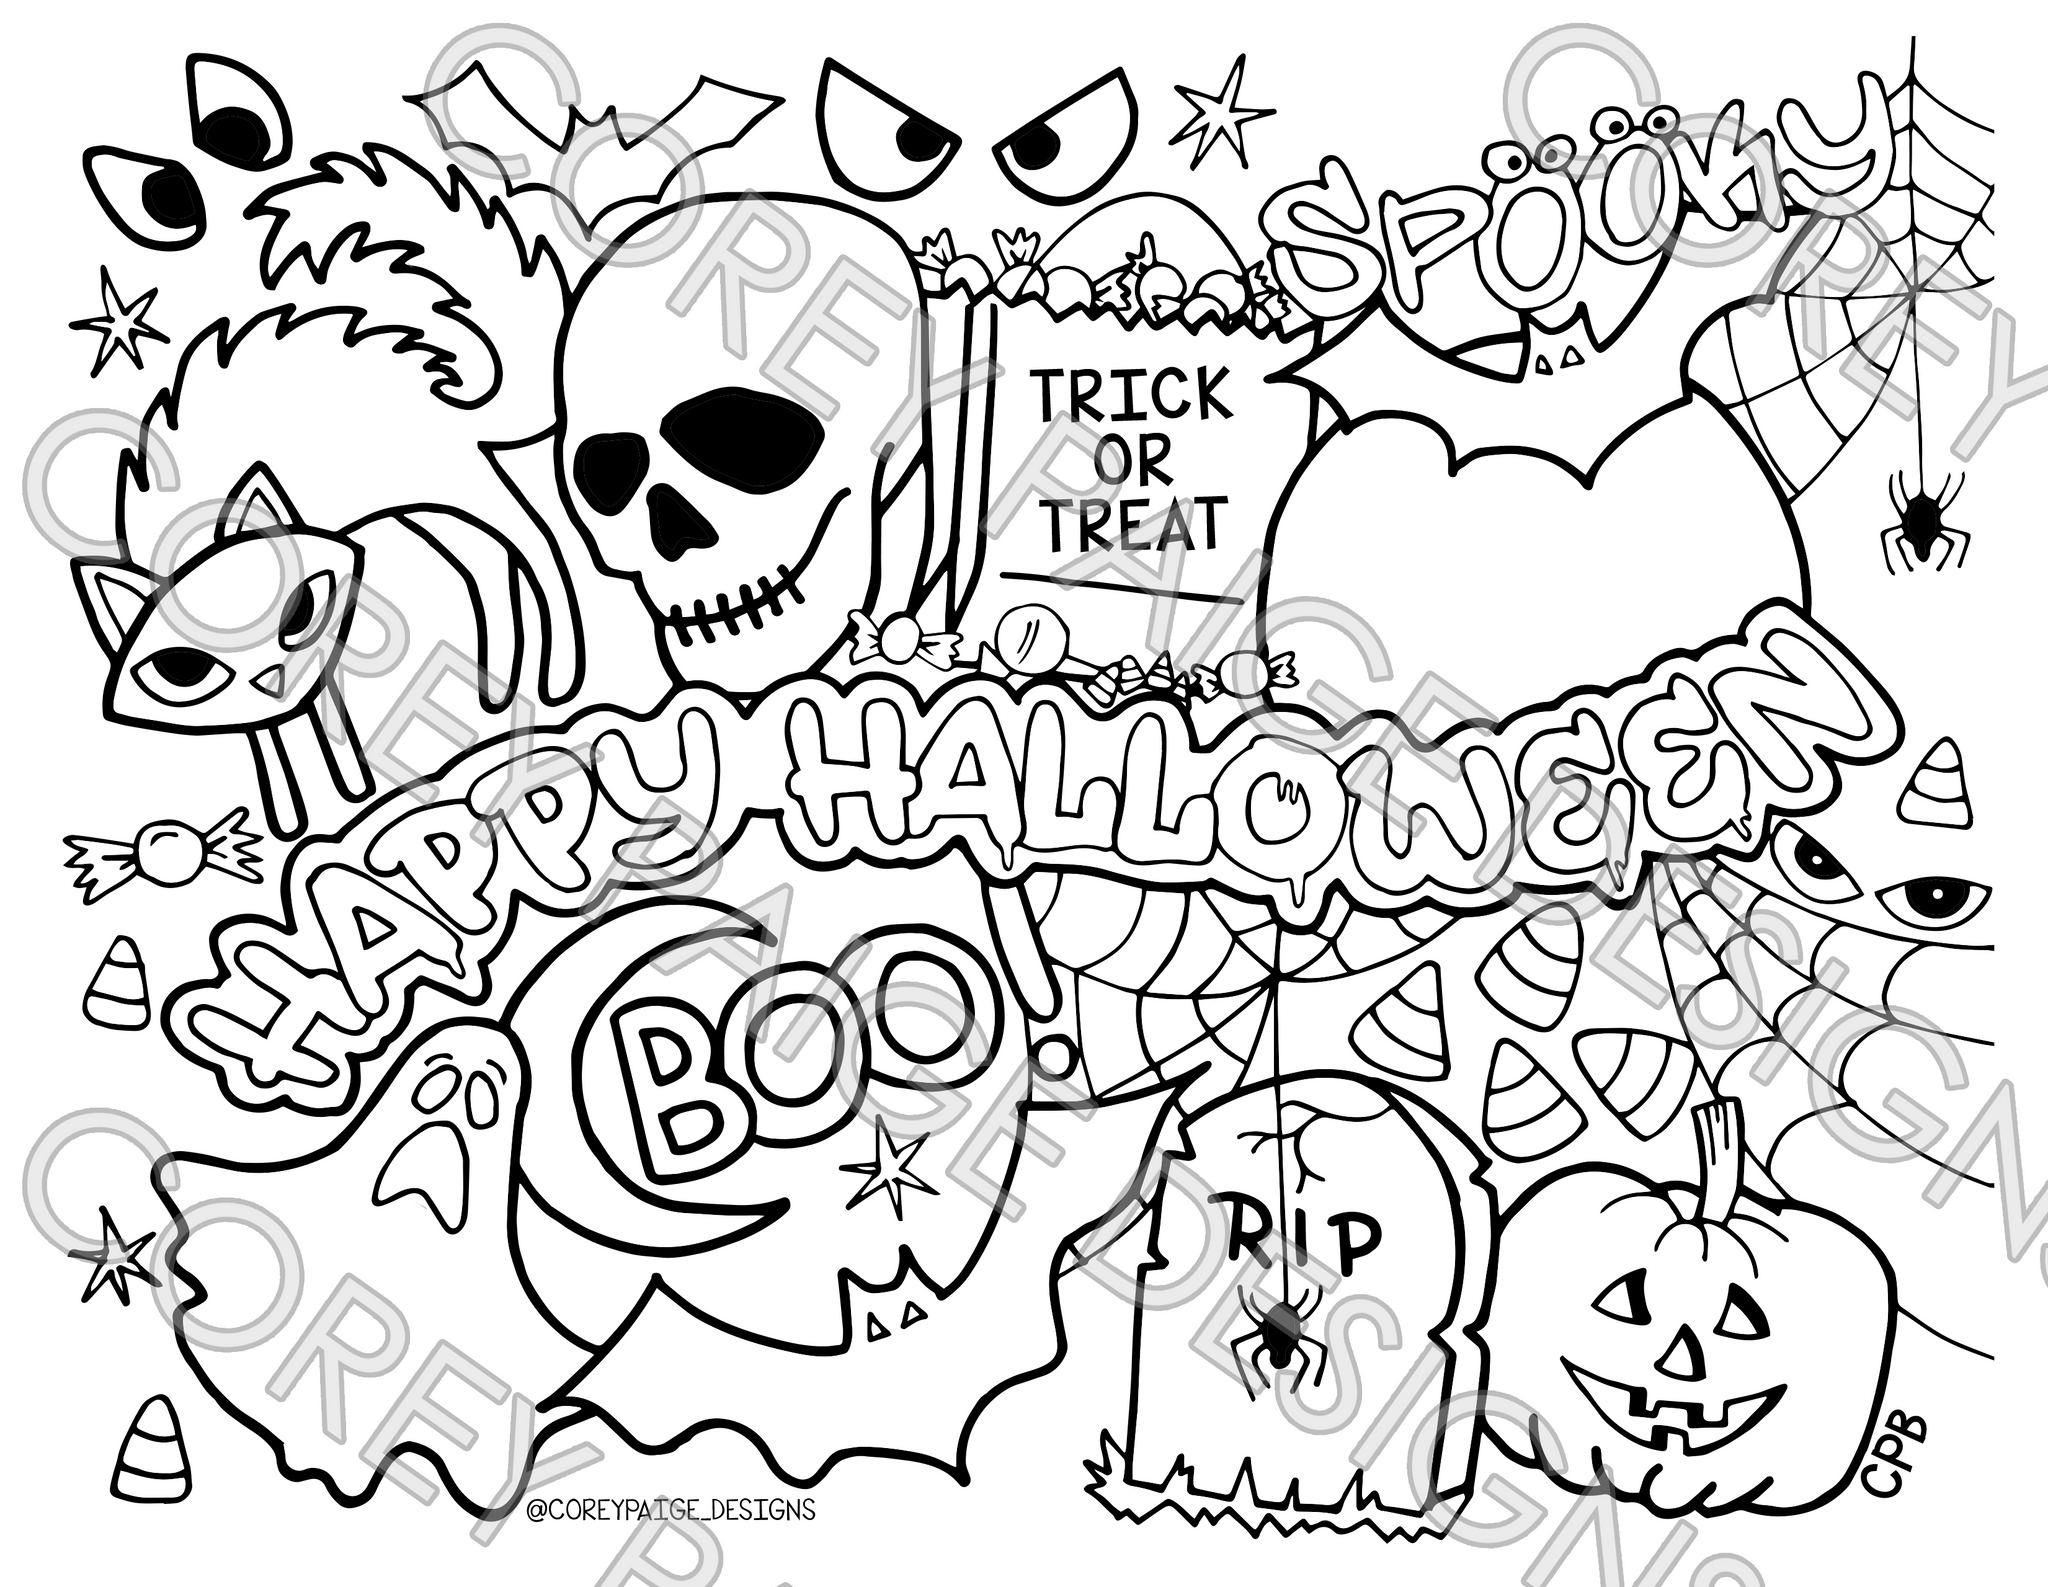 Happy Halloween Coloring Sheet – CoreyPaigeDesigns